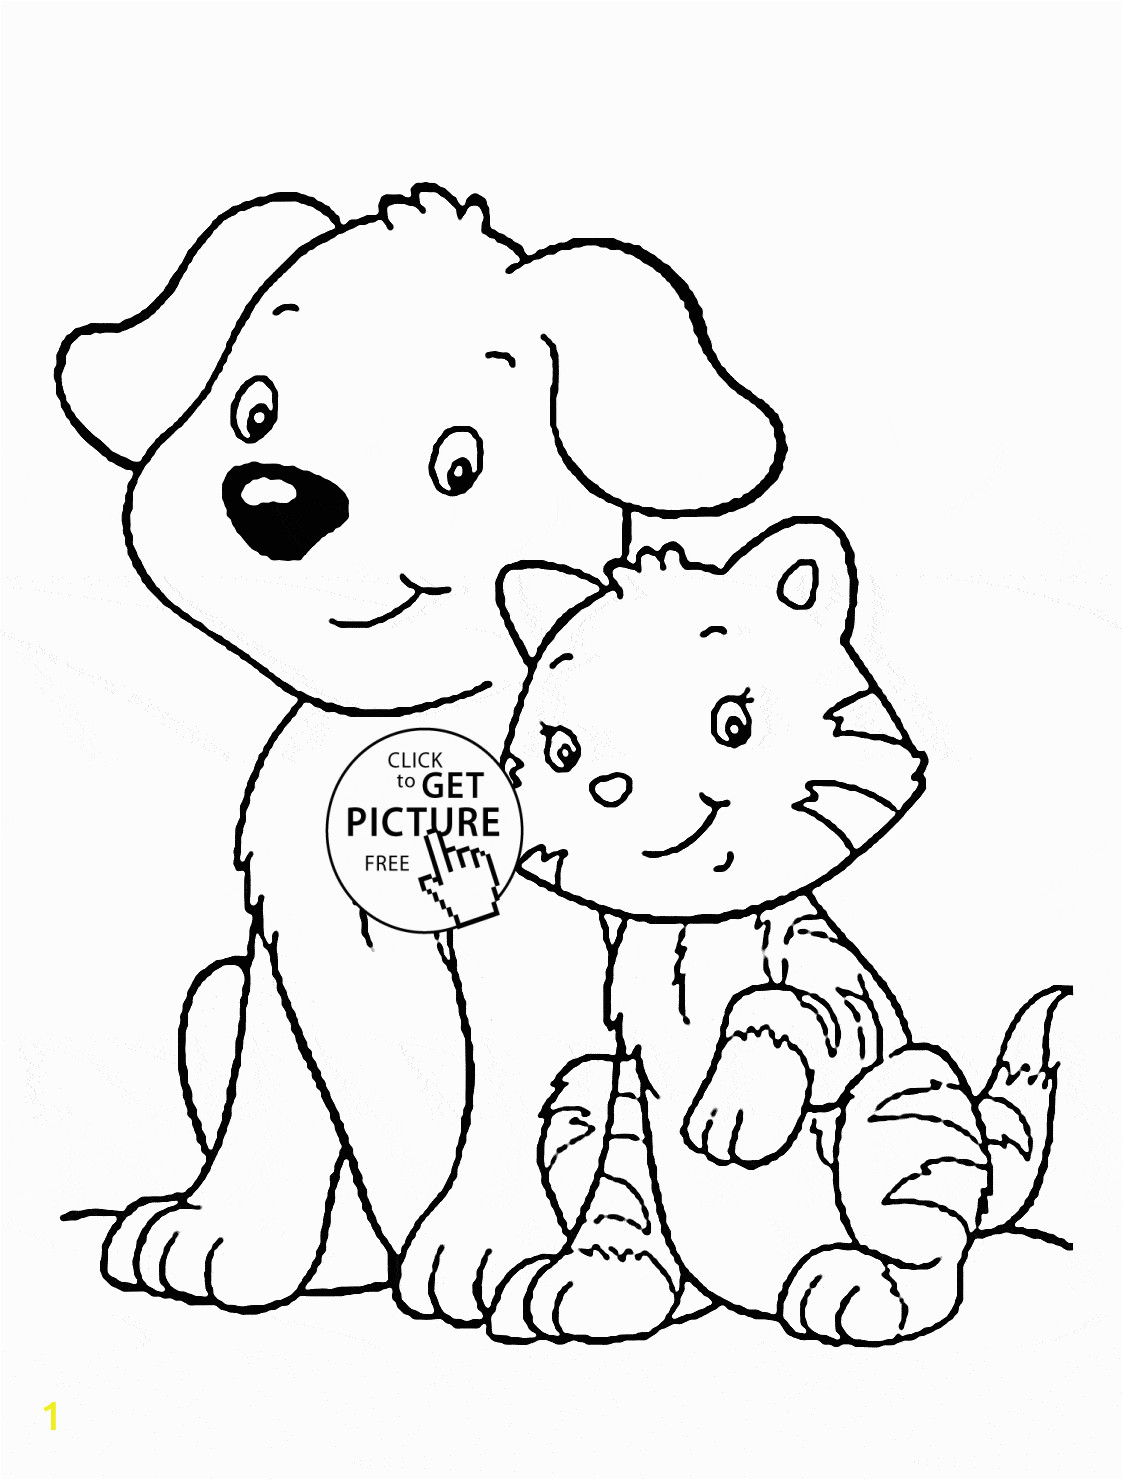 Printable Coloring Pages Dogs and Cats Cat and Dog Coloring Page for Kids Animal Coloring Pages